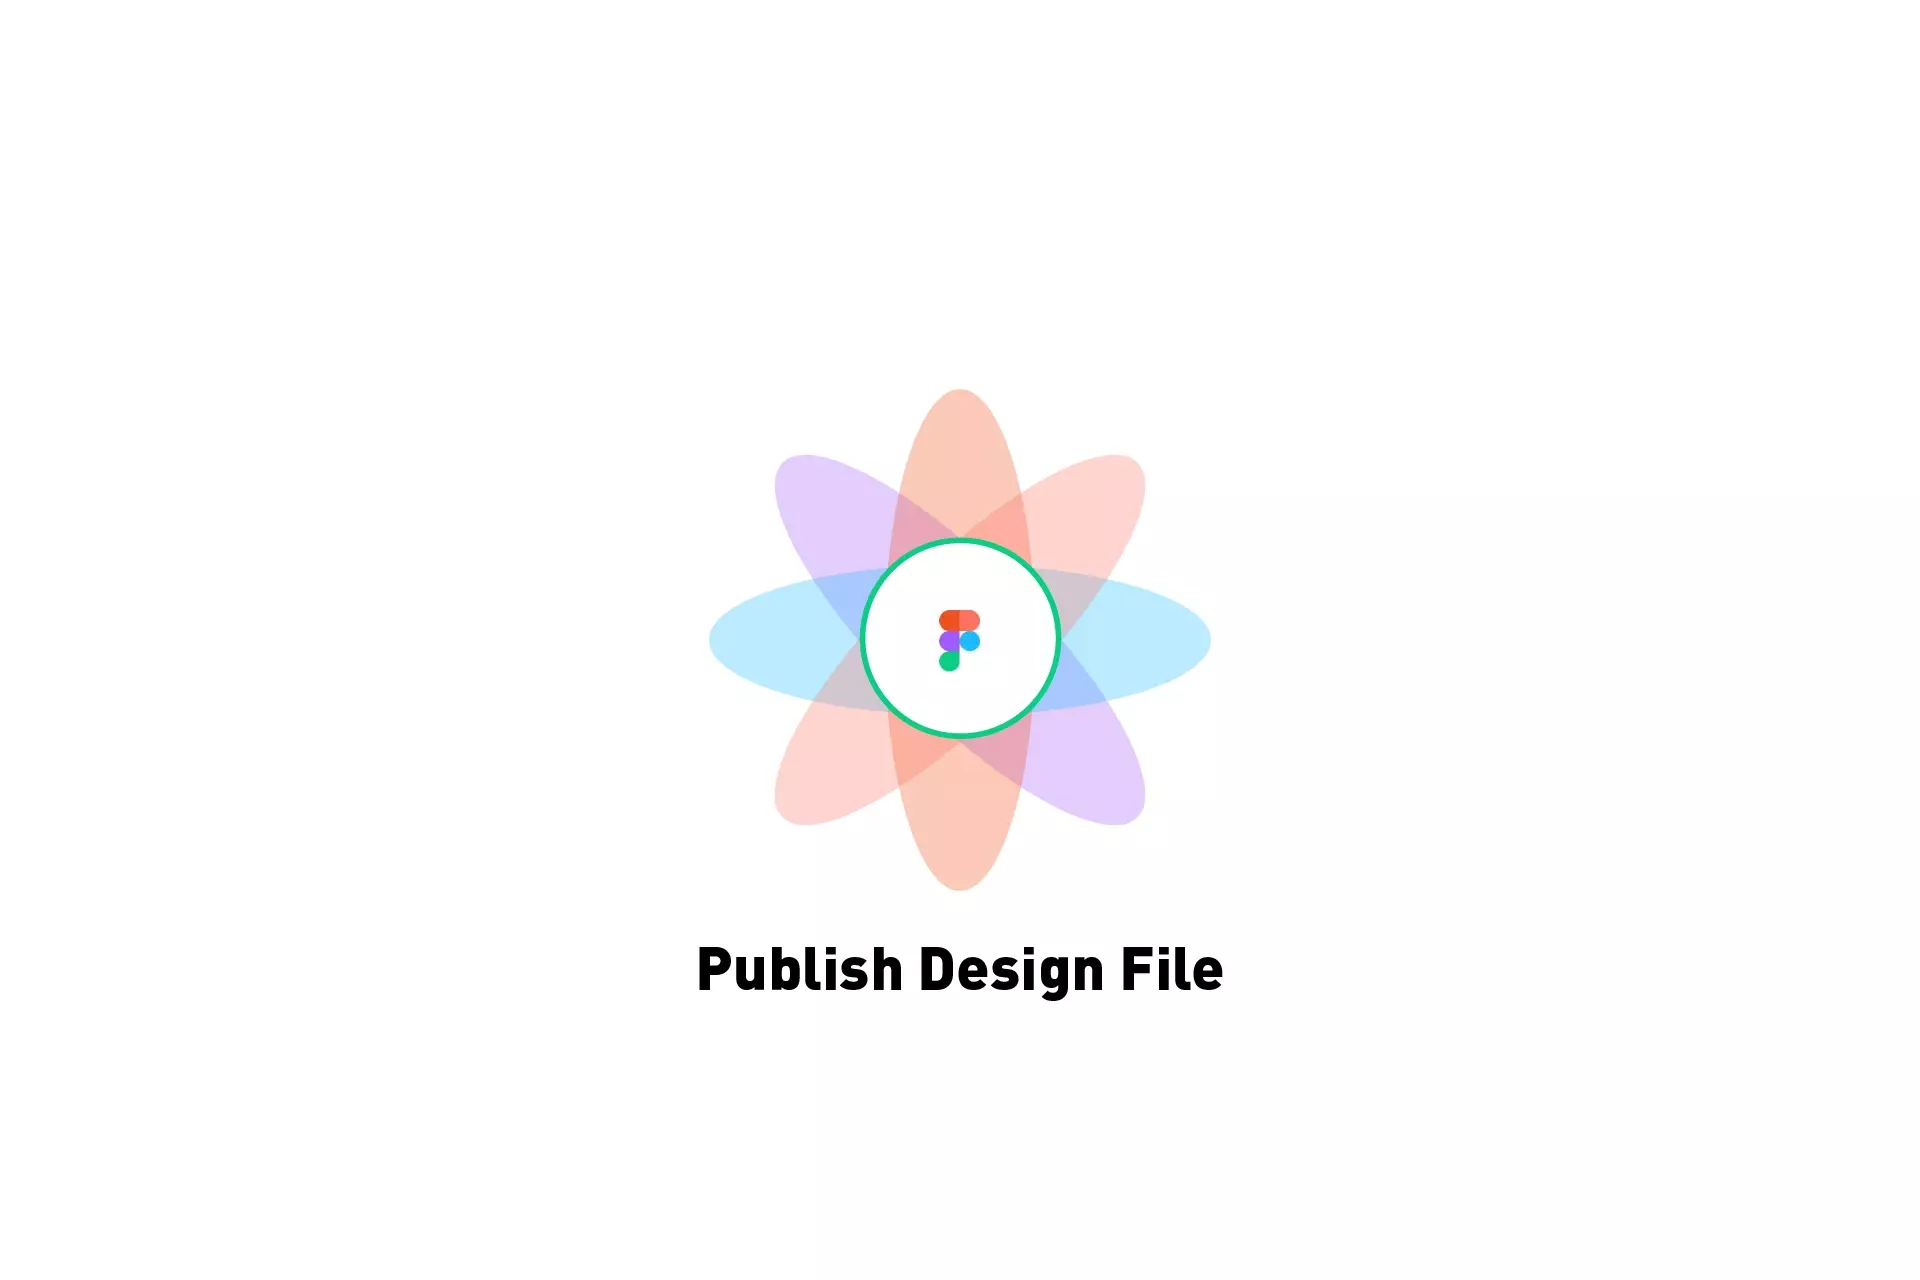 A flower that represents Figma with the text "Publish Design File" beneath it.